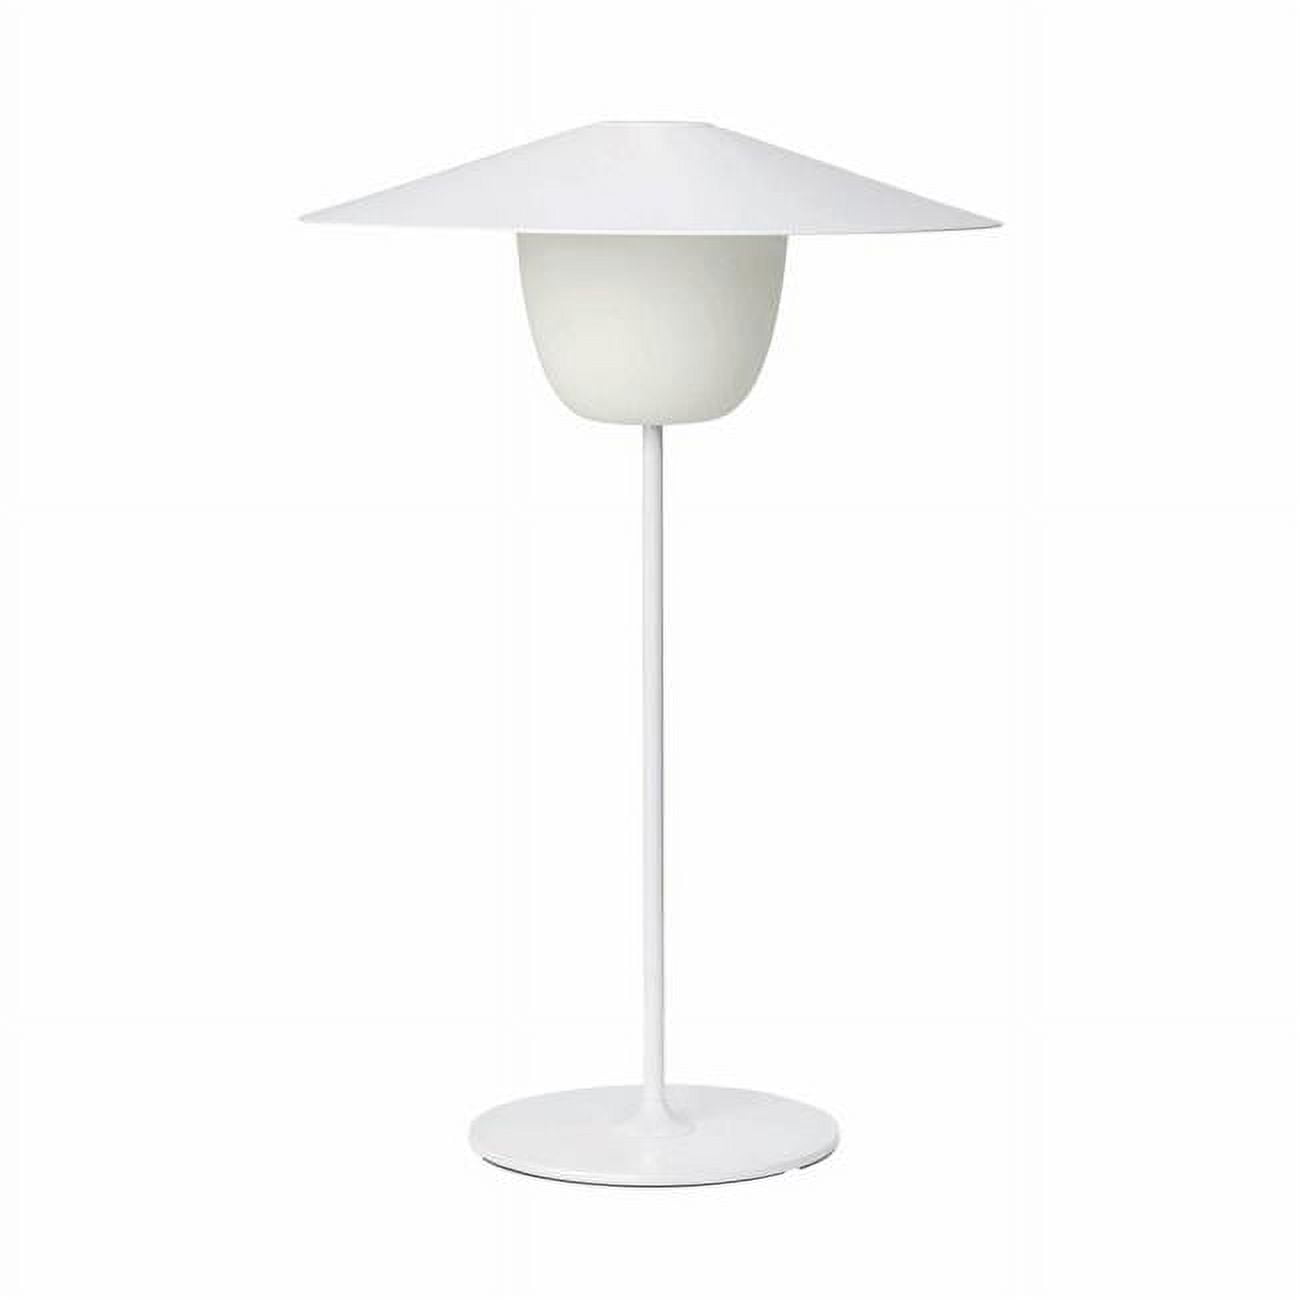 Picture of Blomus 66068 Mobile LED-Lamp, White - Large